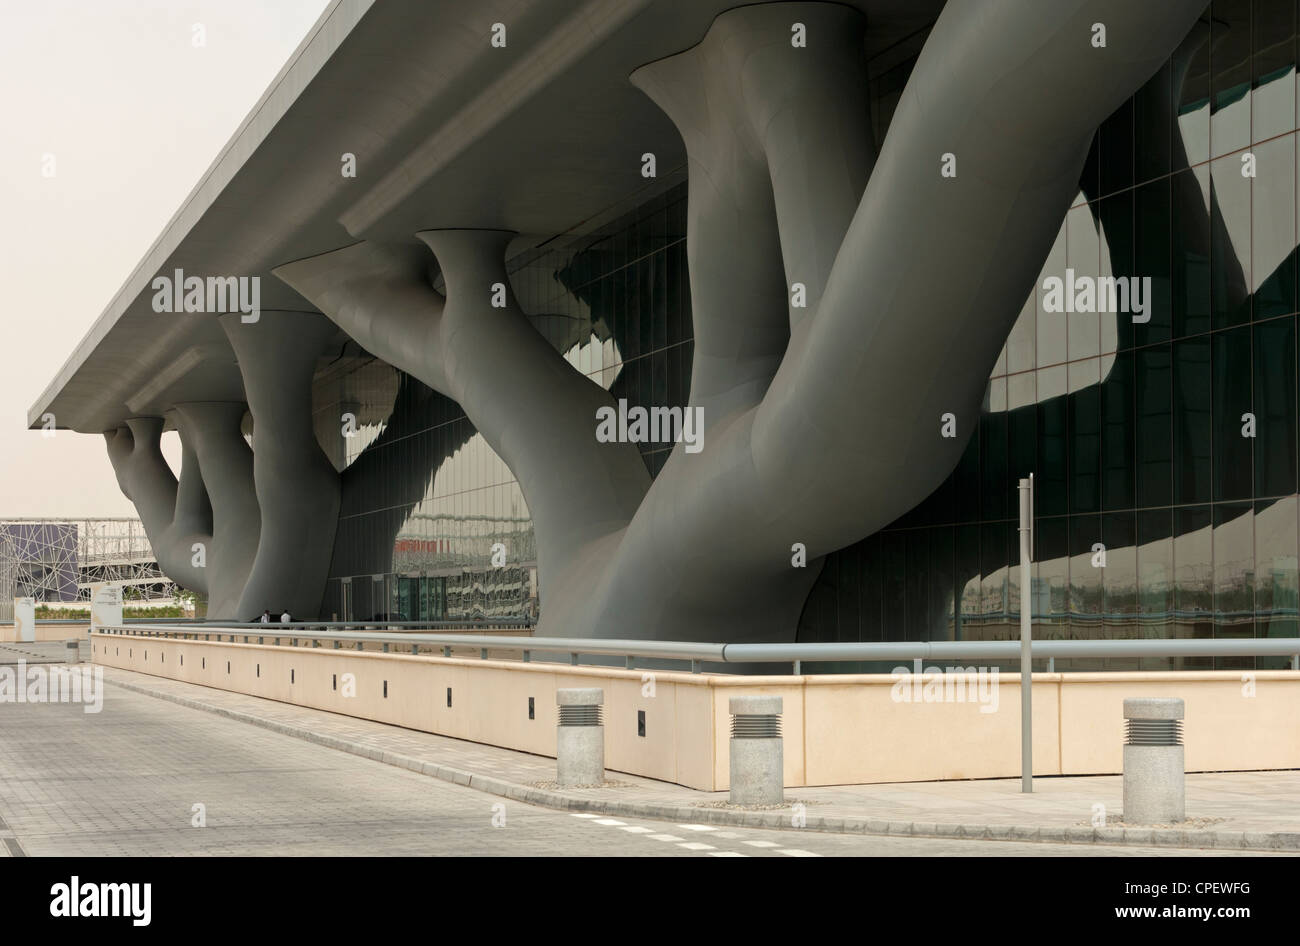 Qatar National Convention Centre, QNCC, with a spectacular facade resembling two intertwined Sidra trees, Doha, Qatar Stock Photo